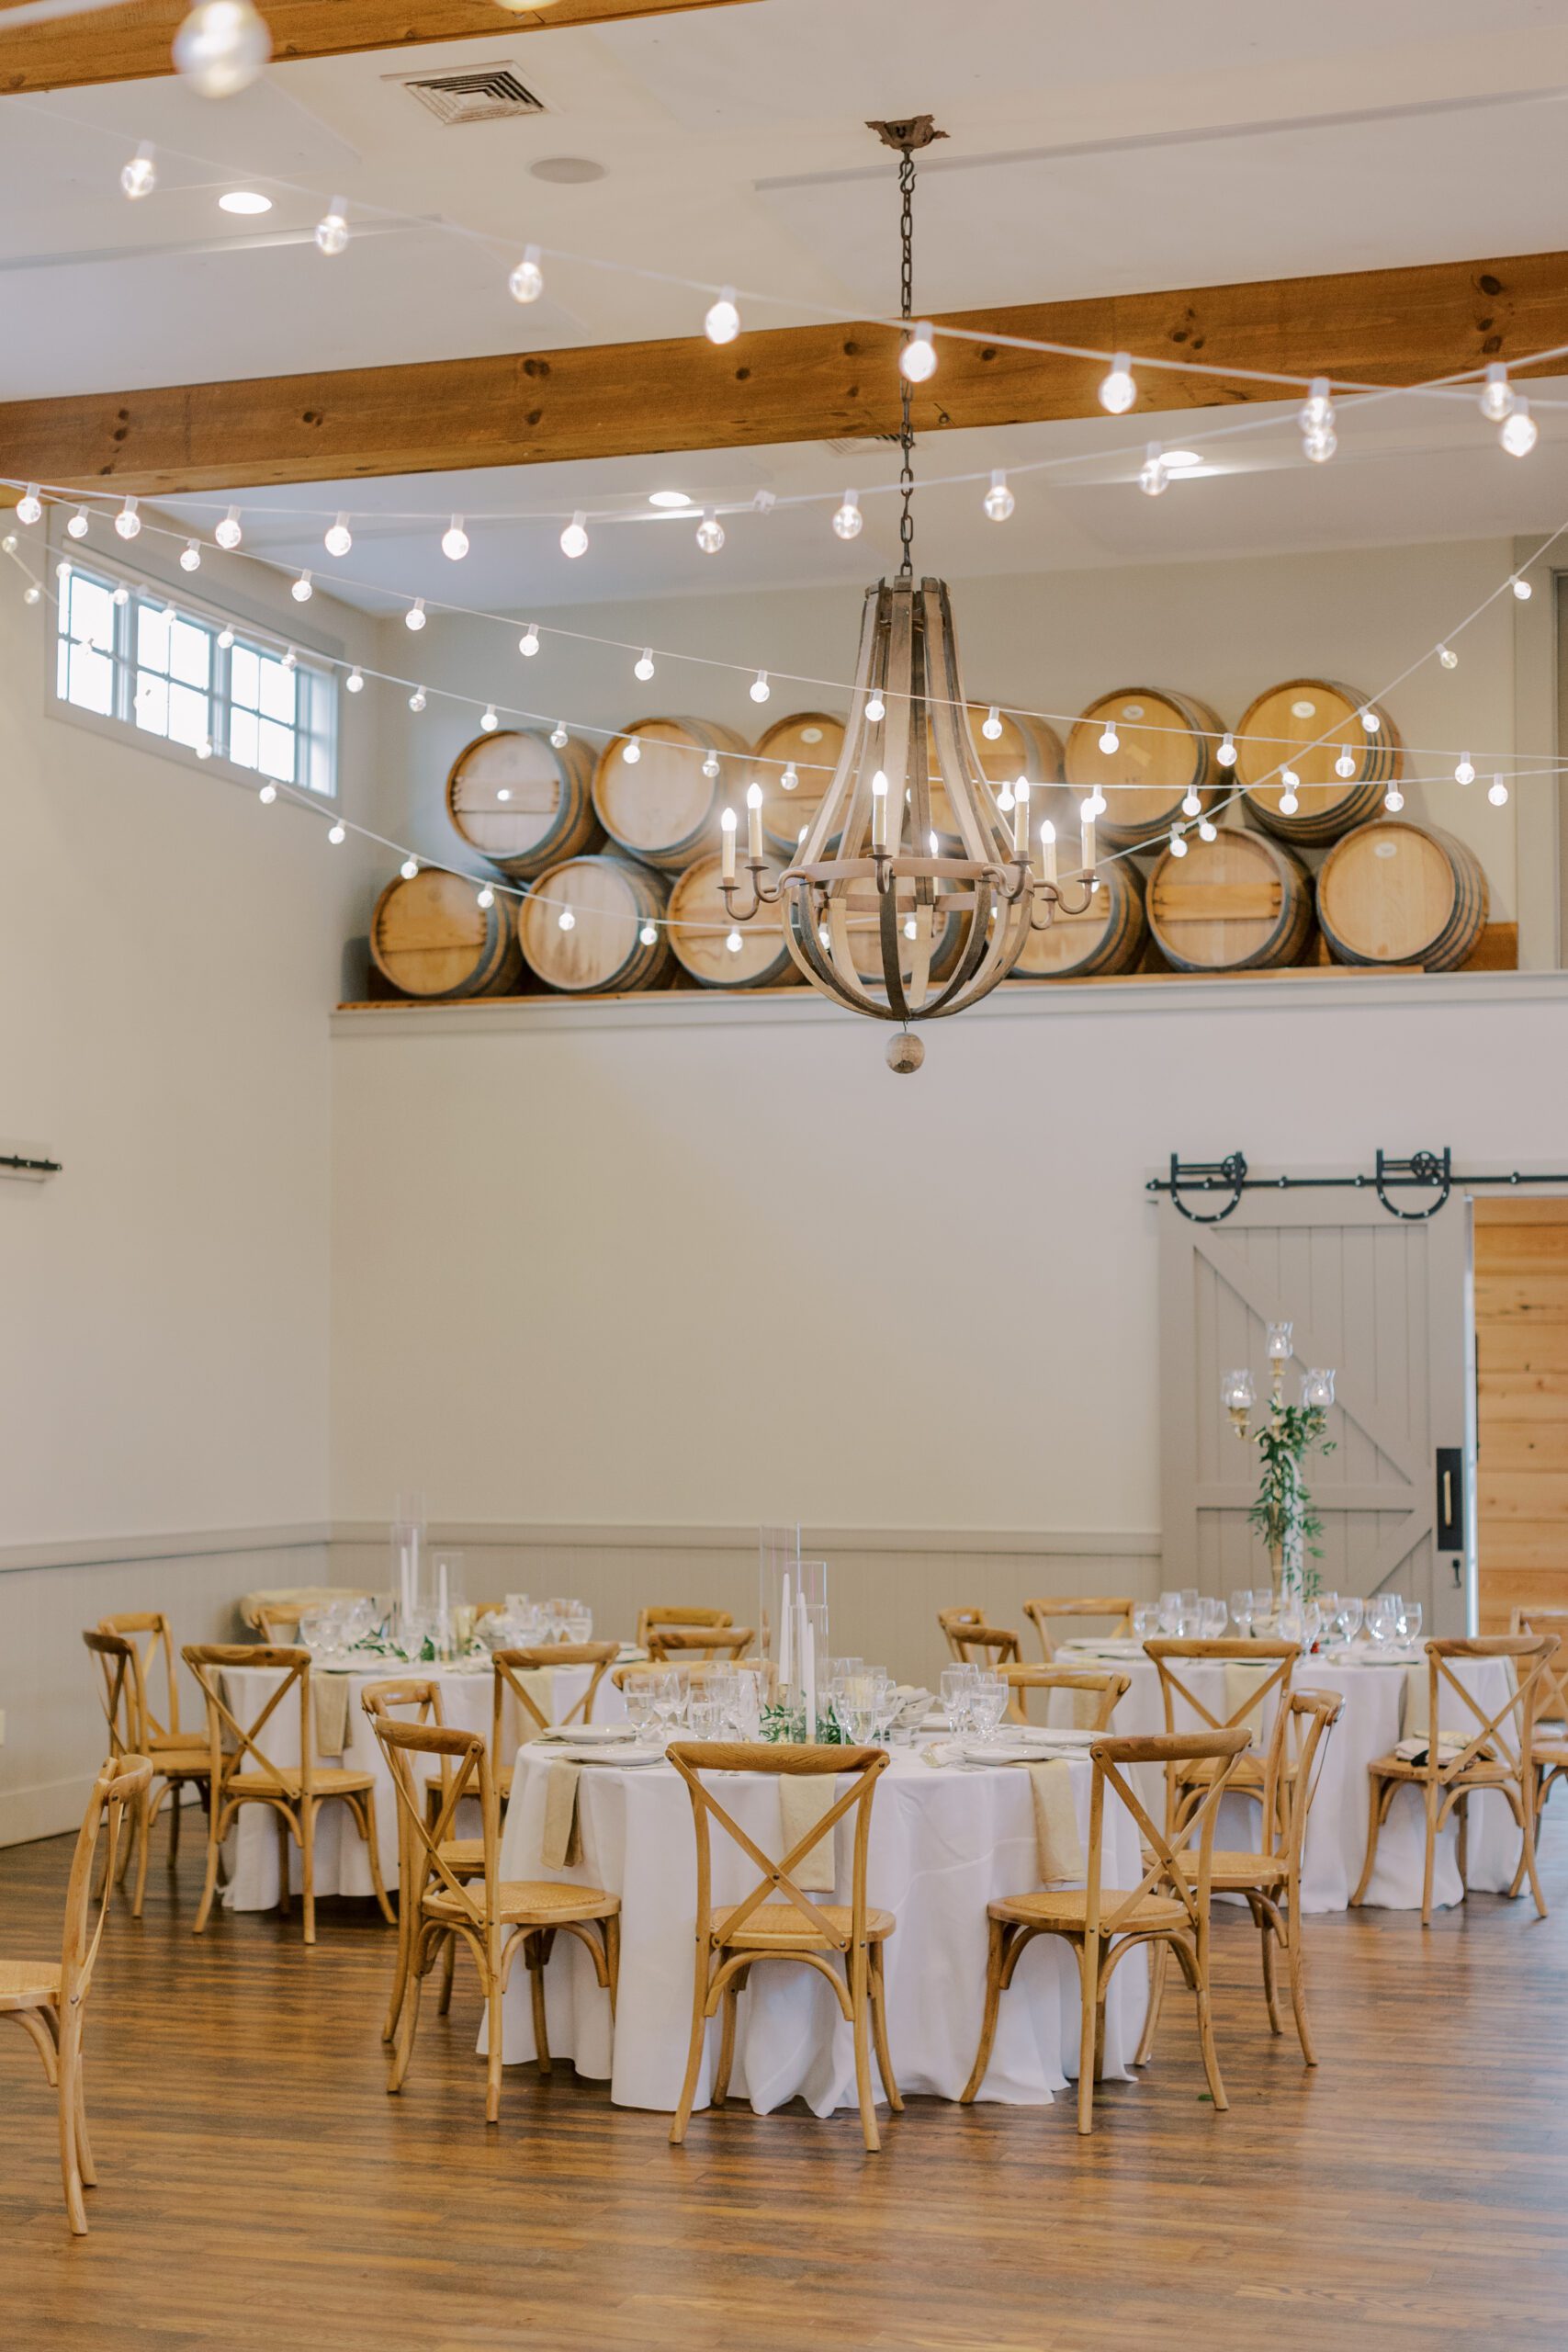 Image of reception space at king family vineyards with white table cloth covered tables, light wooden chairs, twinkle lights and barrels up on a high shelf